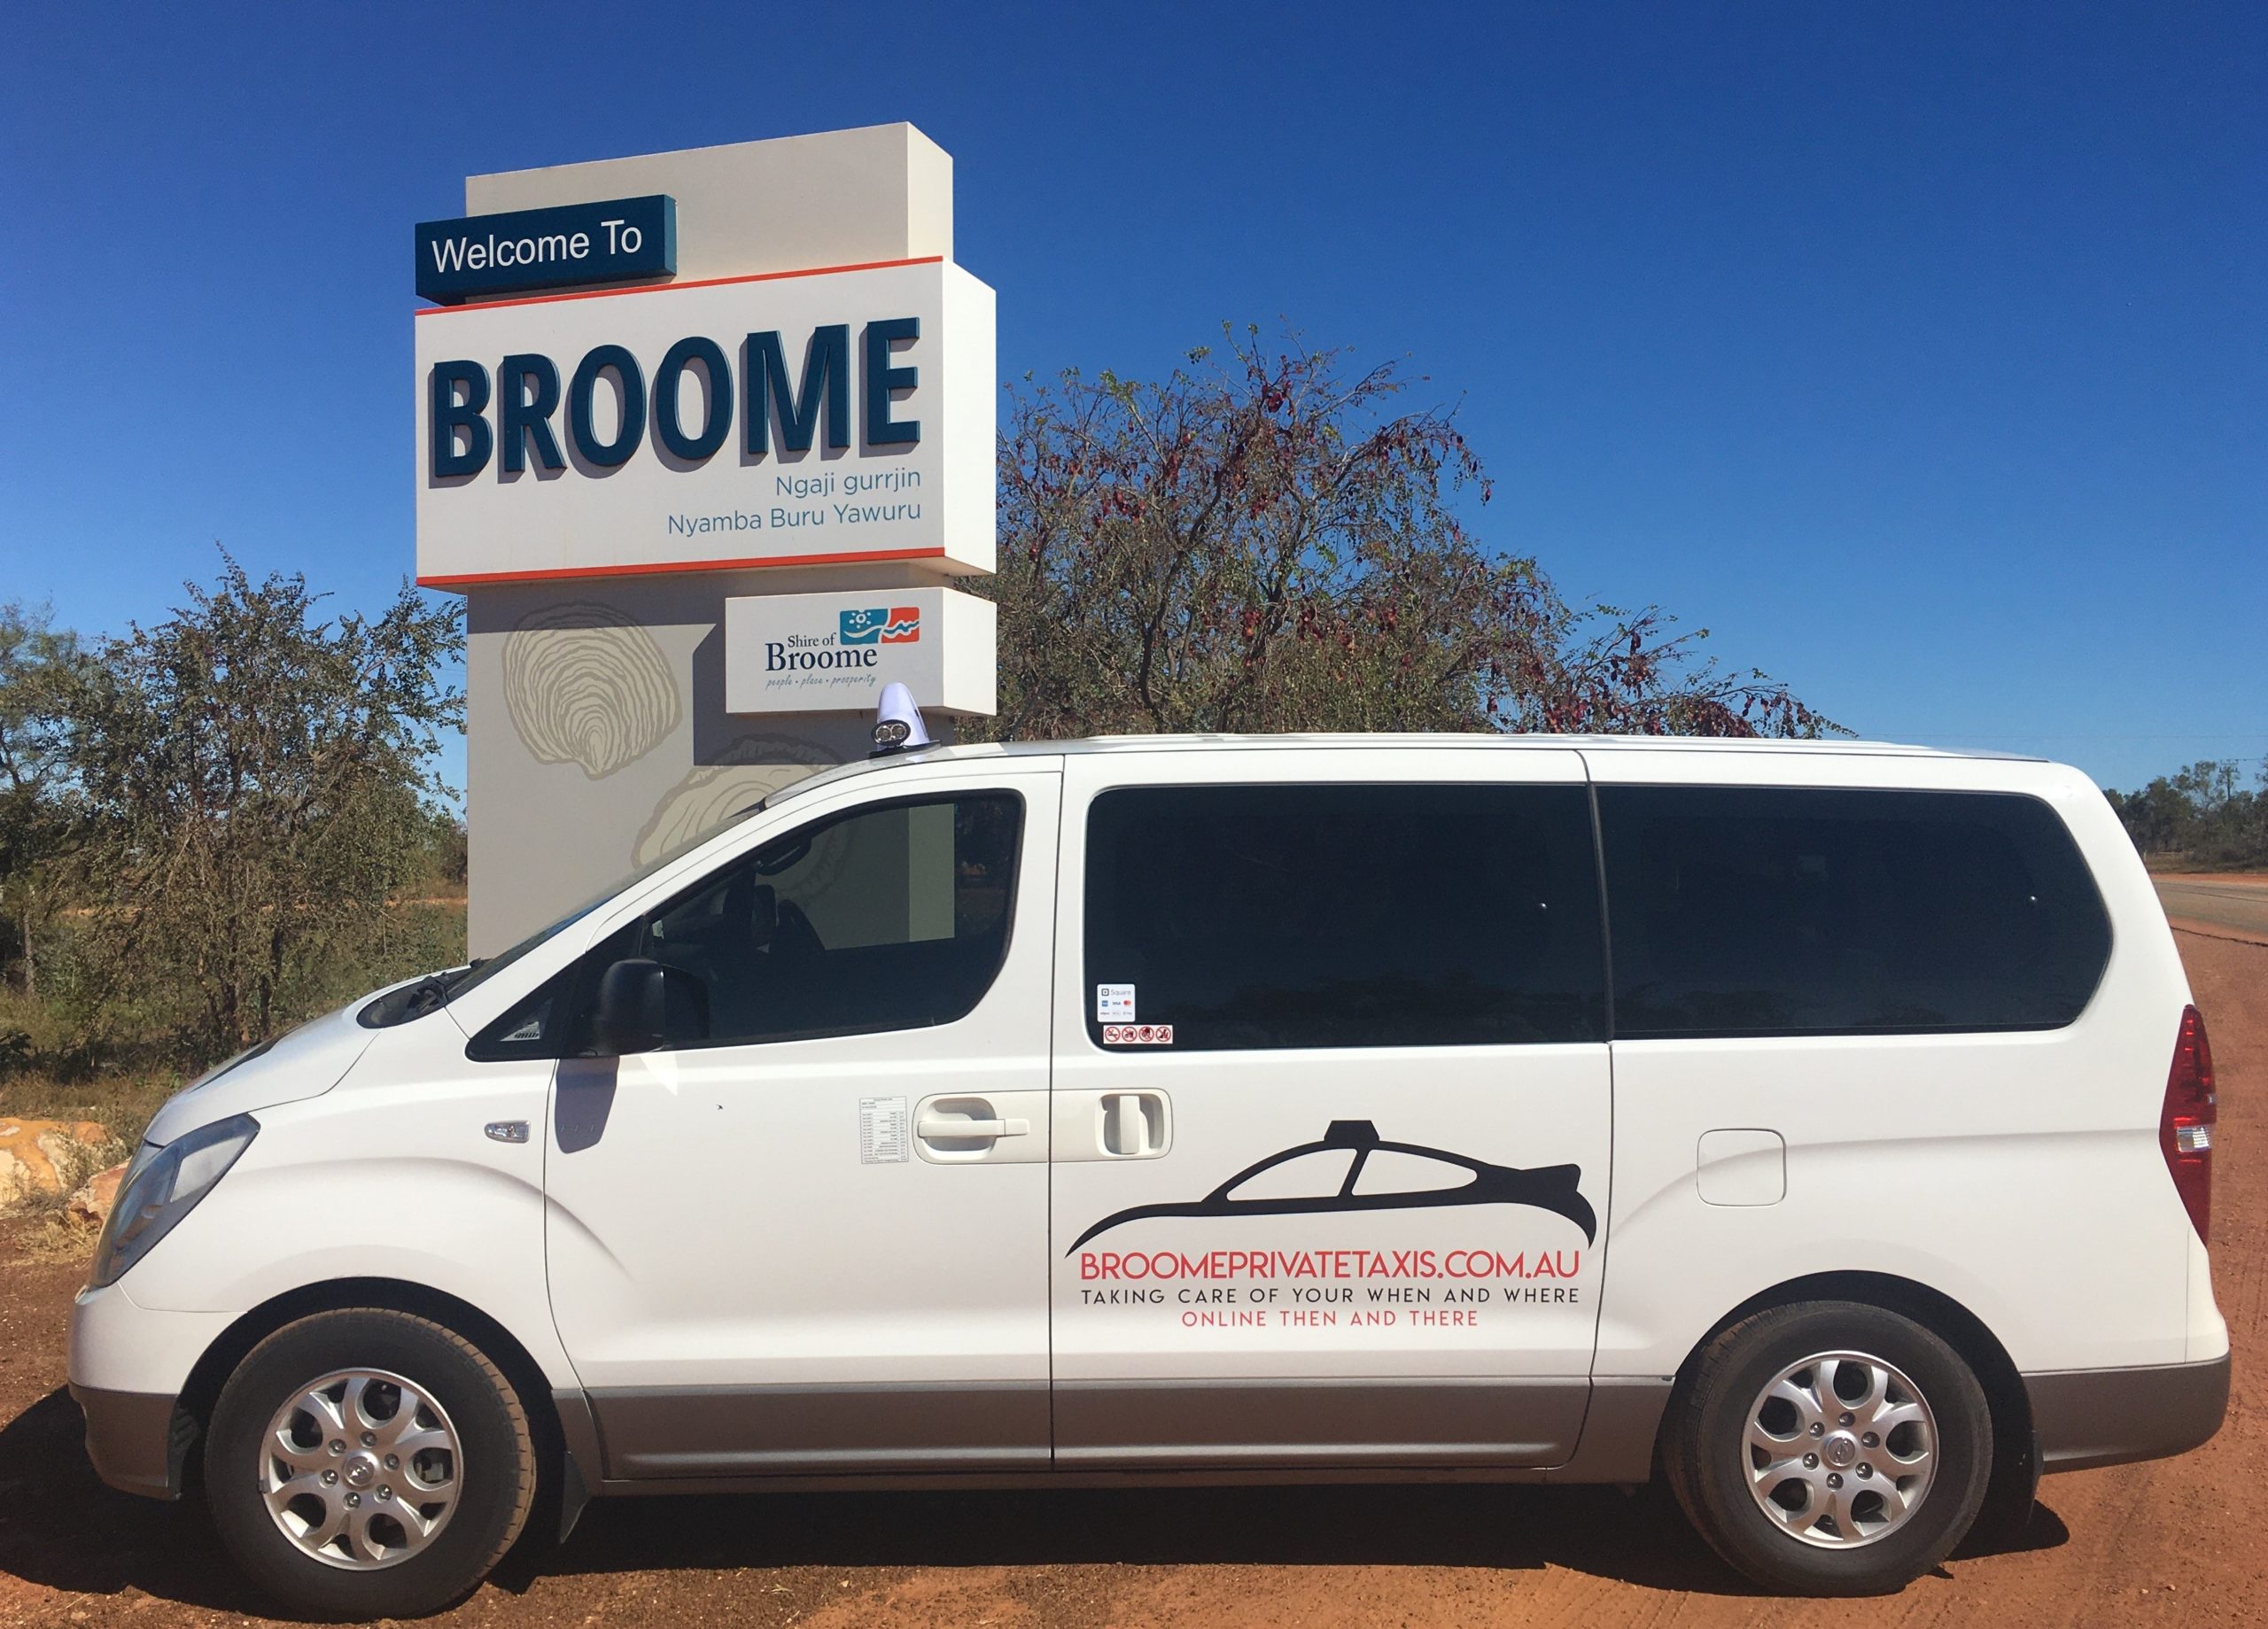 Use Broome Taxis when you stay at Seashells Broome